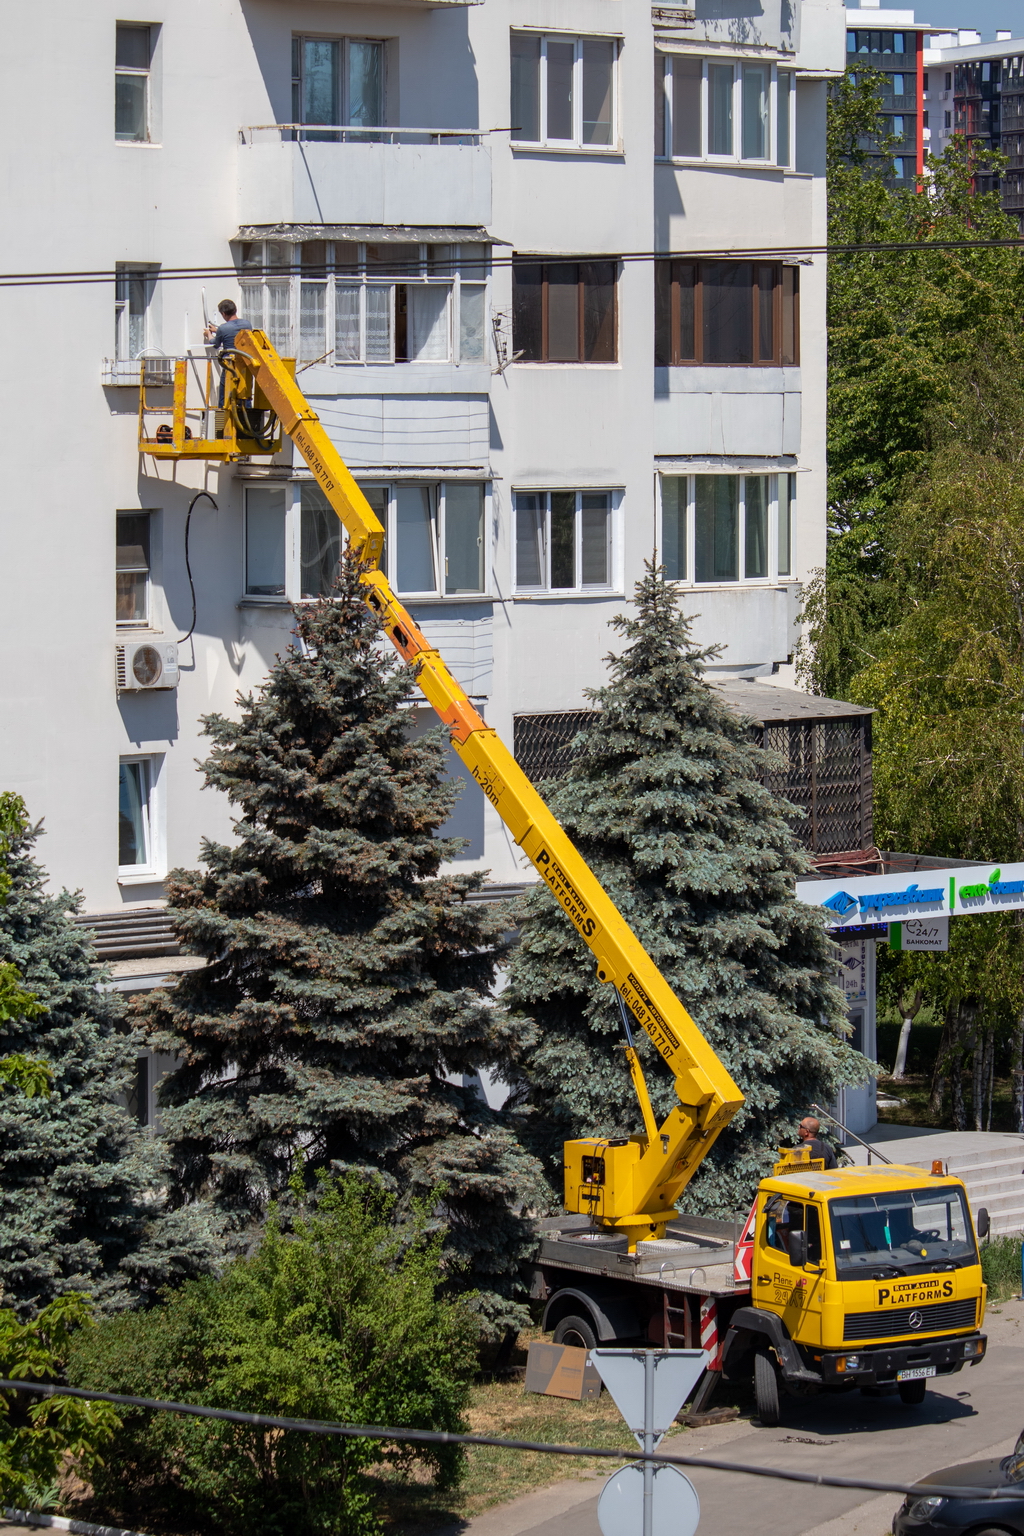 A man installs air conditioning from the cradle of a hydraulic ladder - Ukraine, Odessa, 11,06,2020